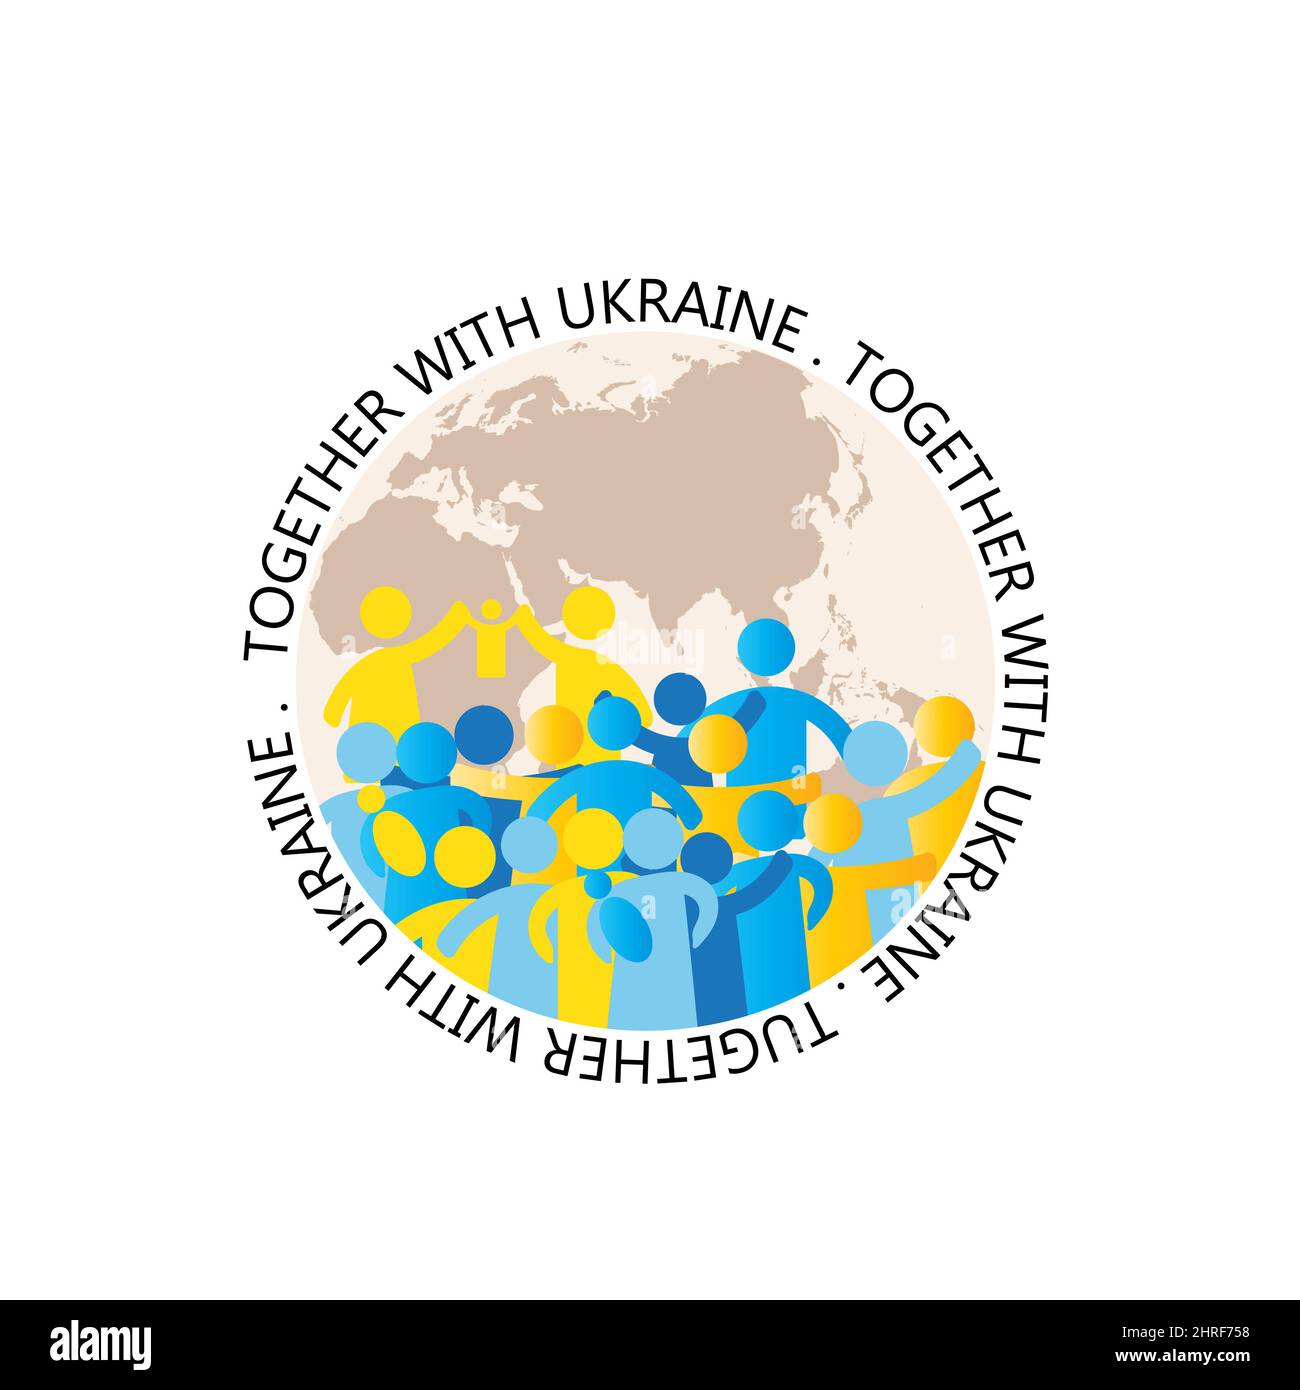 Together with Ukraine. A simple illustration with people in the form of icons, symbols showing solidarity with Ukraine and asking for help. No war Stock Photo